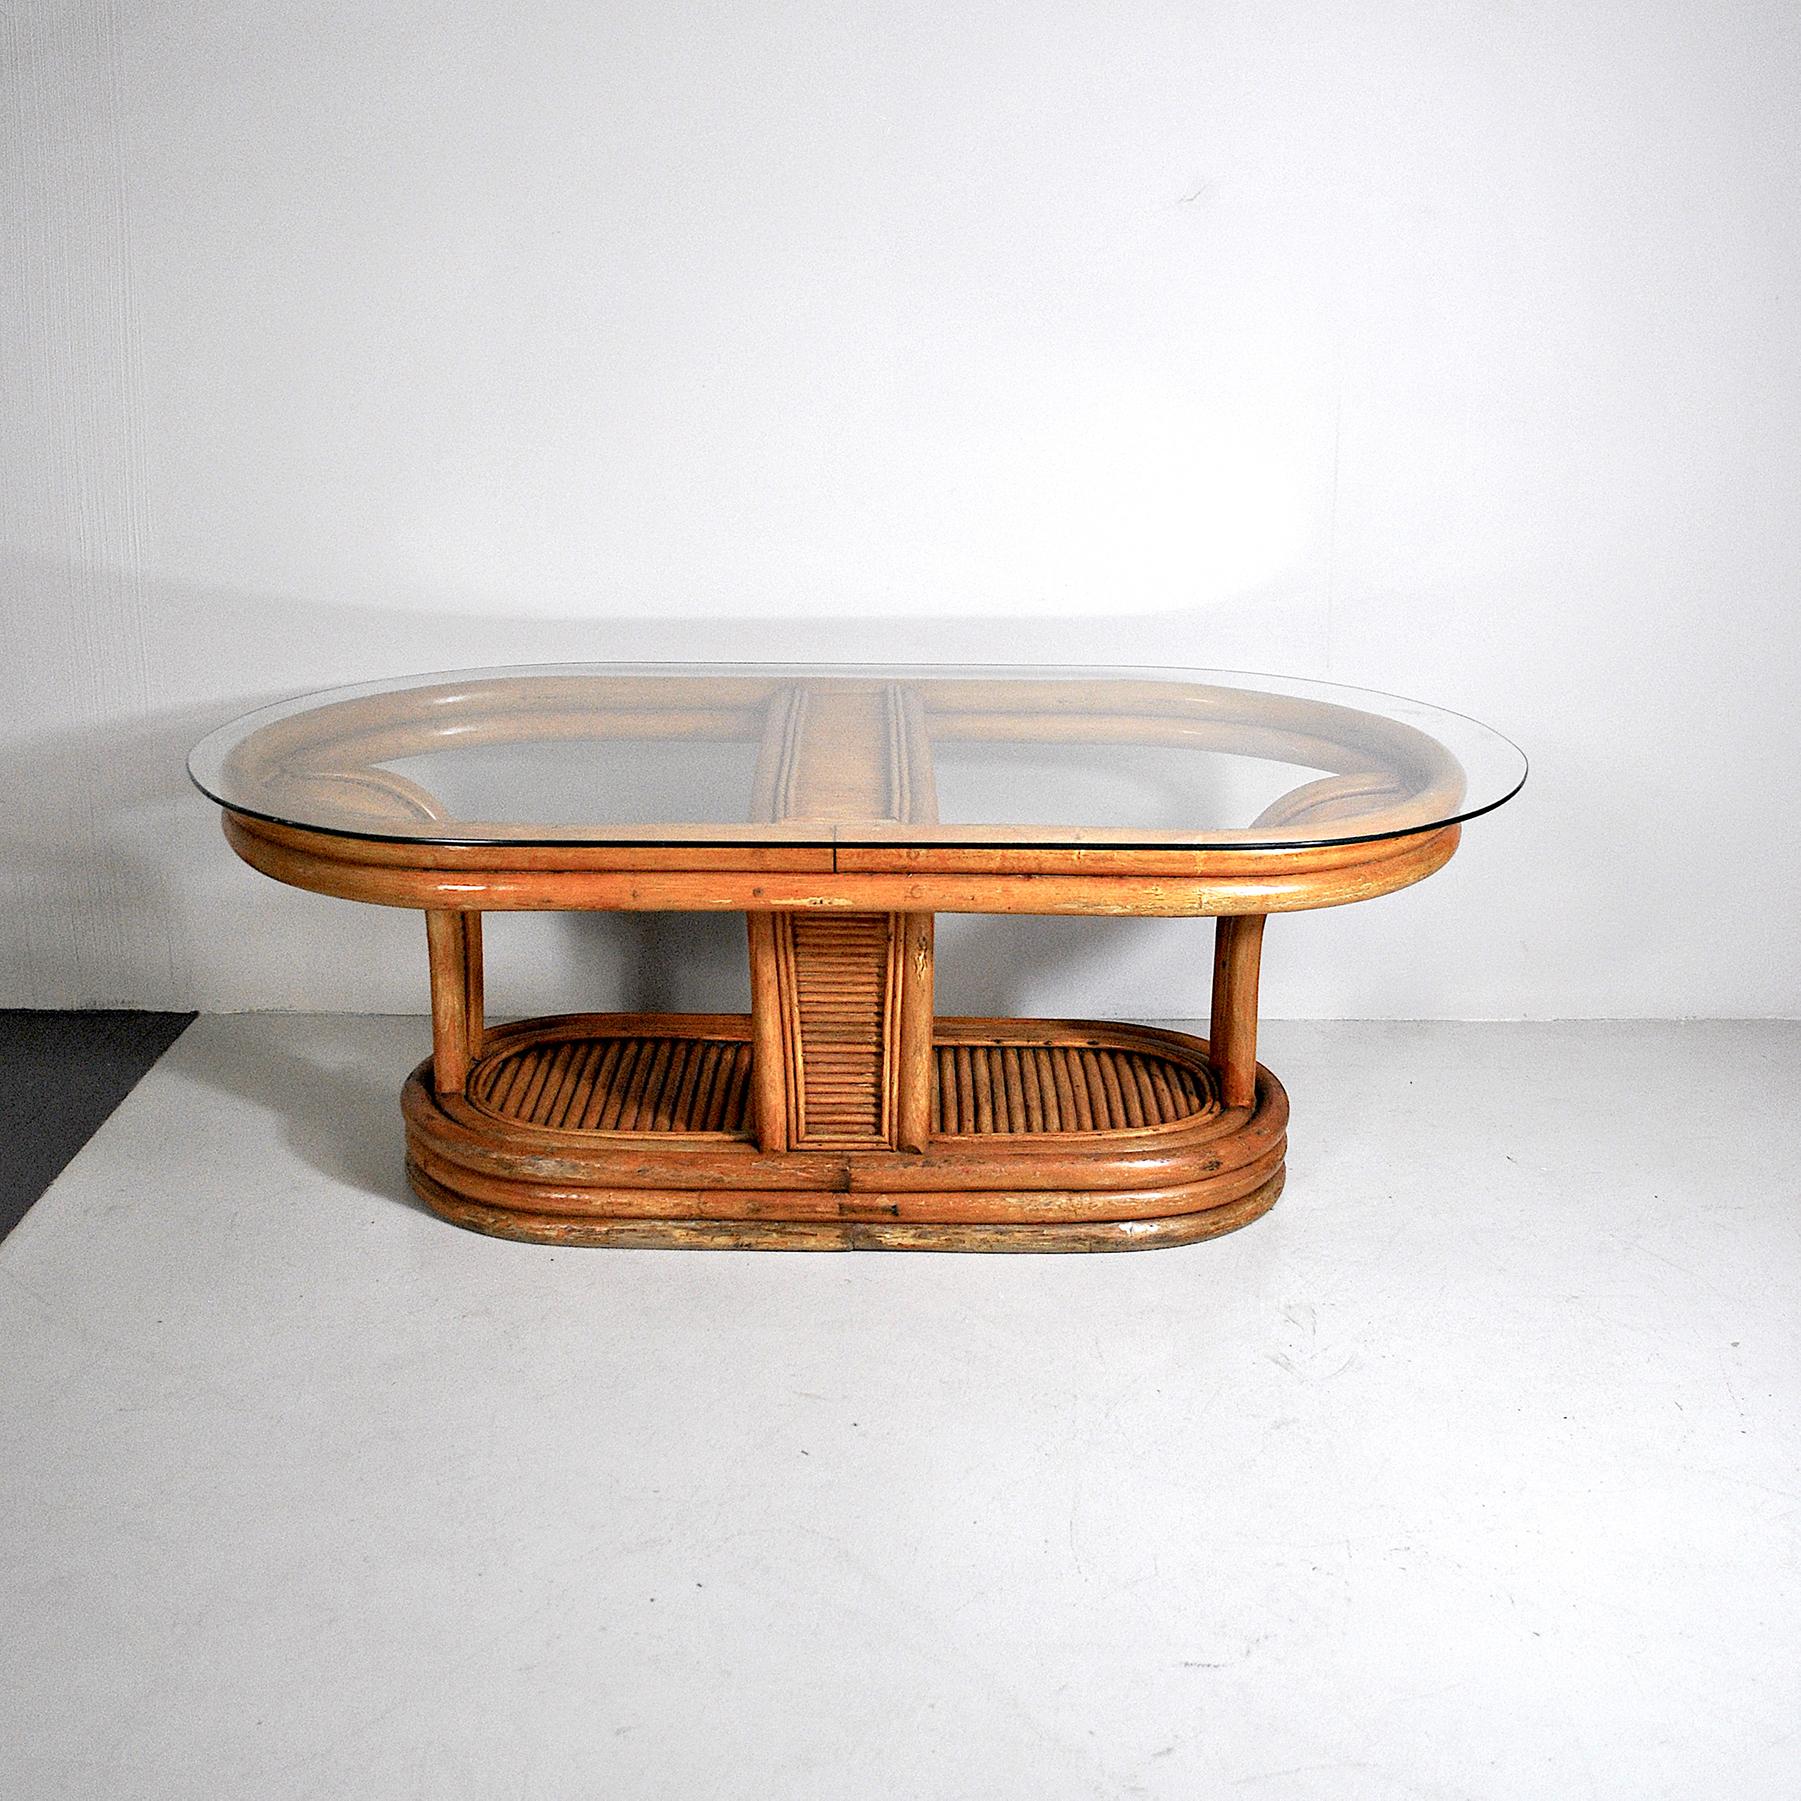 Oval bamboo coffee table belonging to the Italian Art Deco of the 1940s.